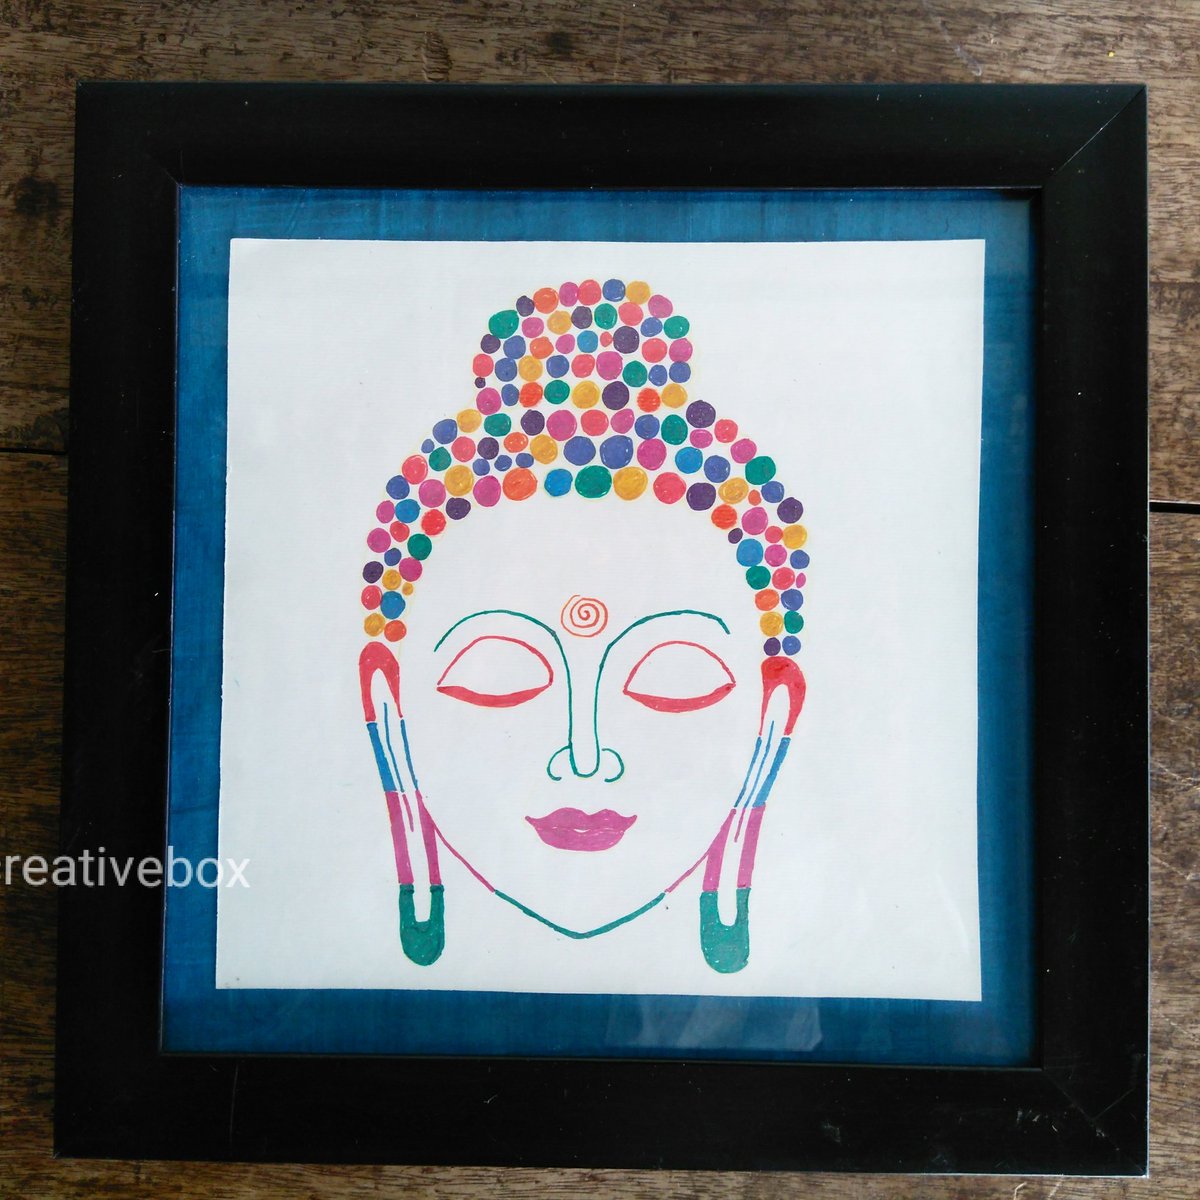 'Colourful Budda'

Art code: ABCBB33
Size: 11'×11' with frame.
Price: ₹299/- only (shipping extra)
.
To order DM/call at +919618481518 email abcreative@yahoo.com
Mention Art code and your contact number.
Instagram/abcreativebox
#handcrafts #homedecor #wallframe #wallart #Buddha